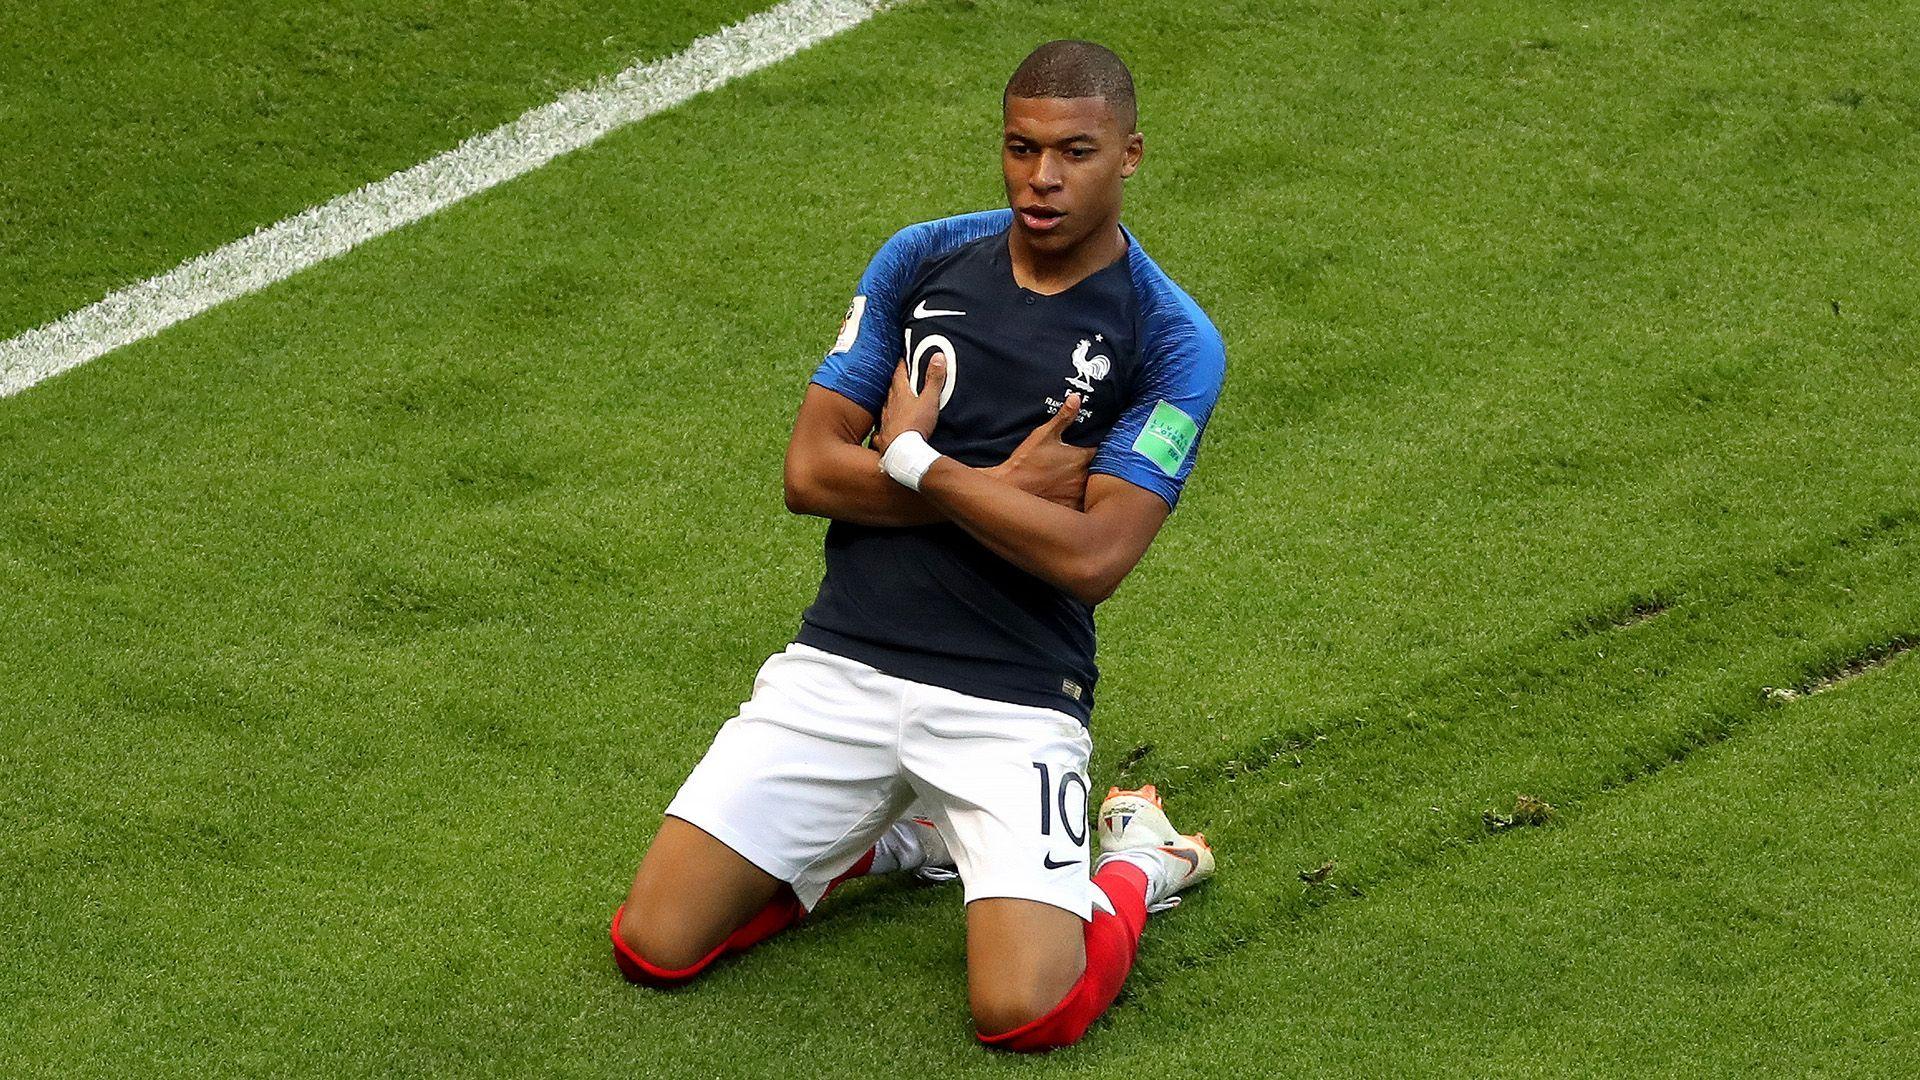 Kylian Mbappé 2019 France Wallpaper and Background Image